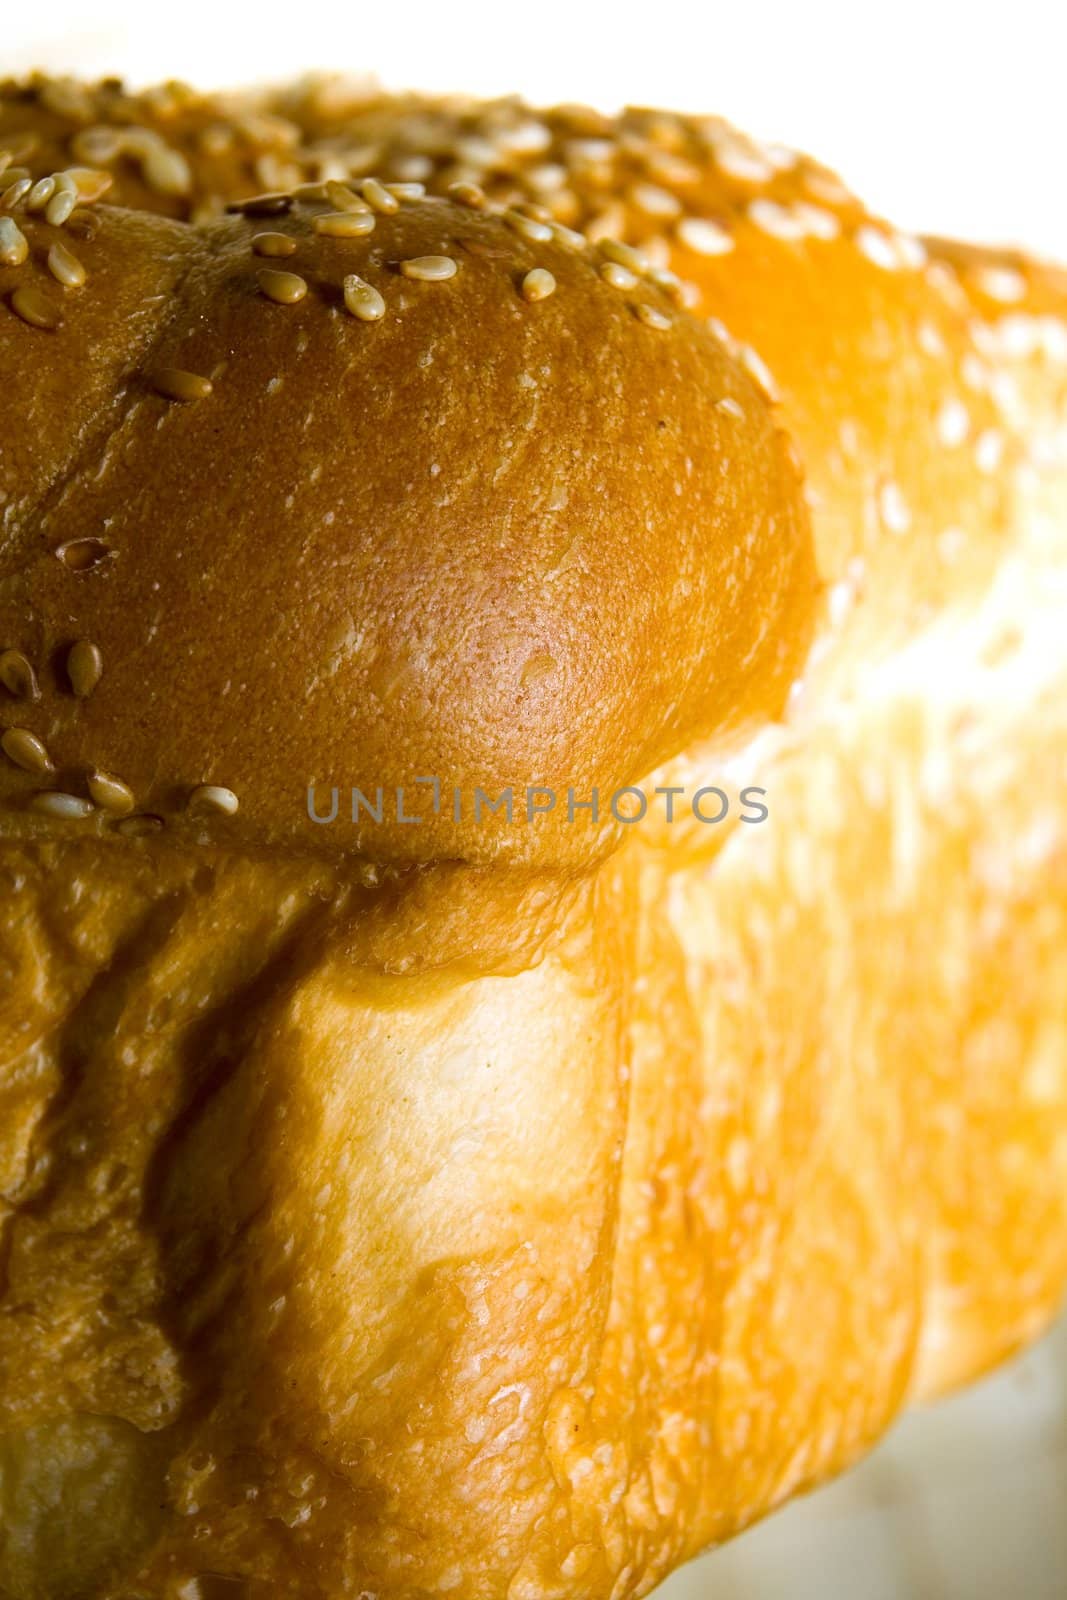 White bread baked from organic flour photographed close up